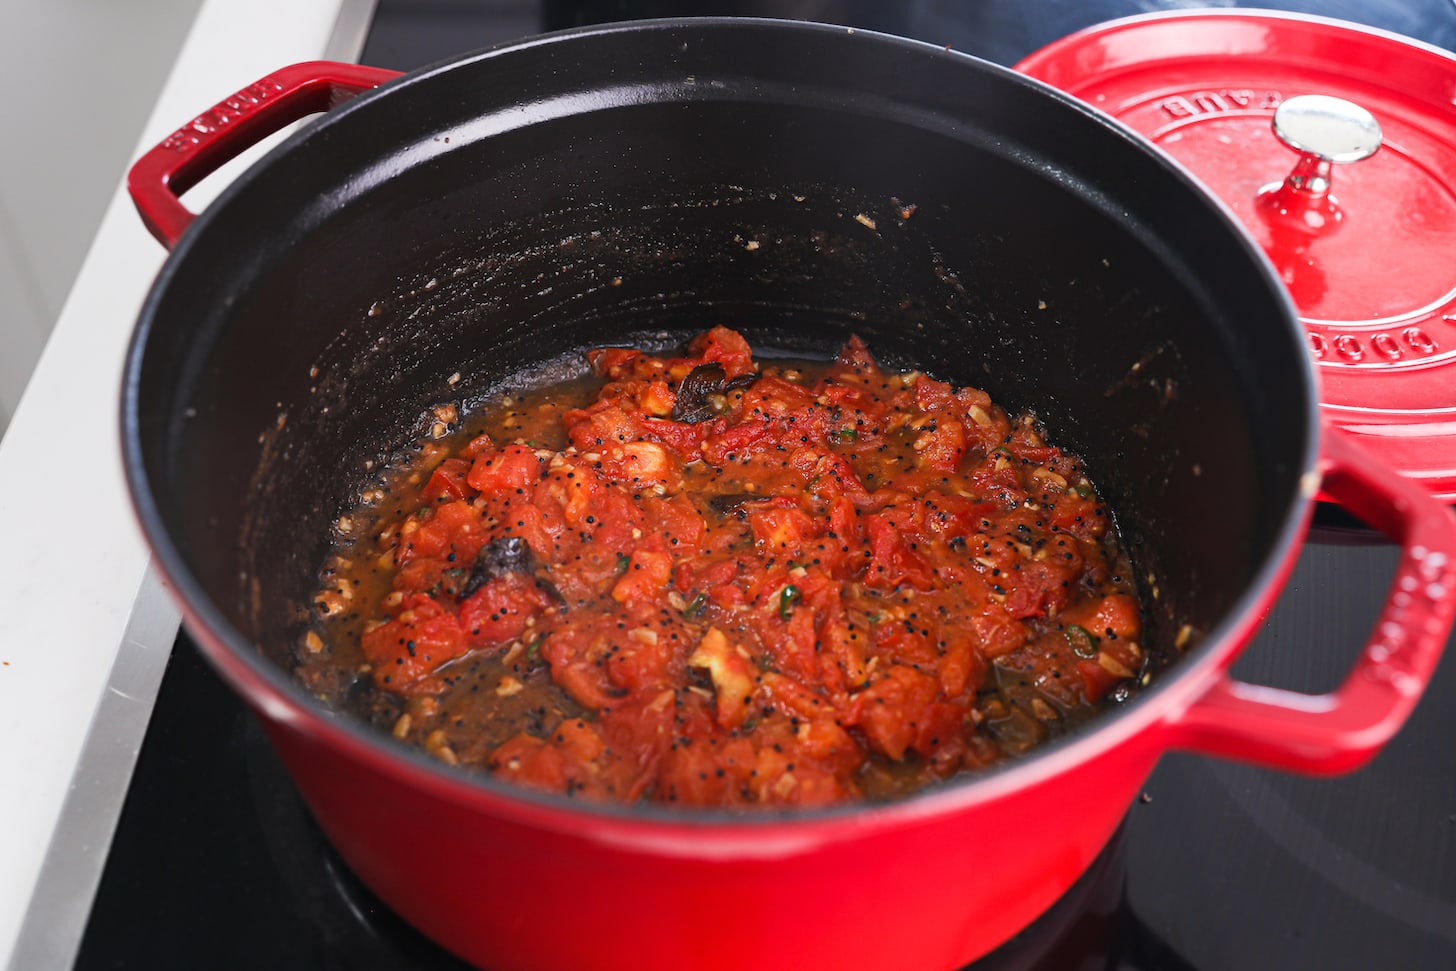 A red pot of red sauce with tiny black seeds.